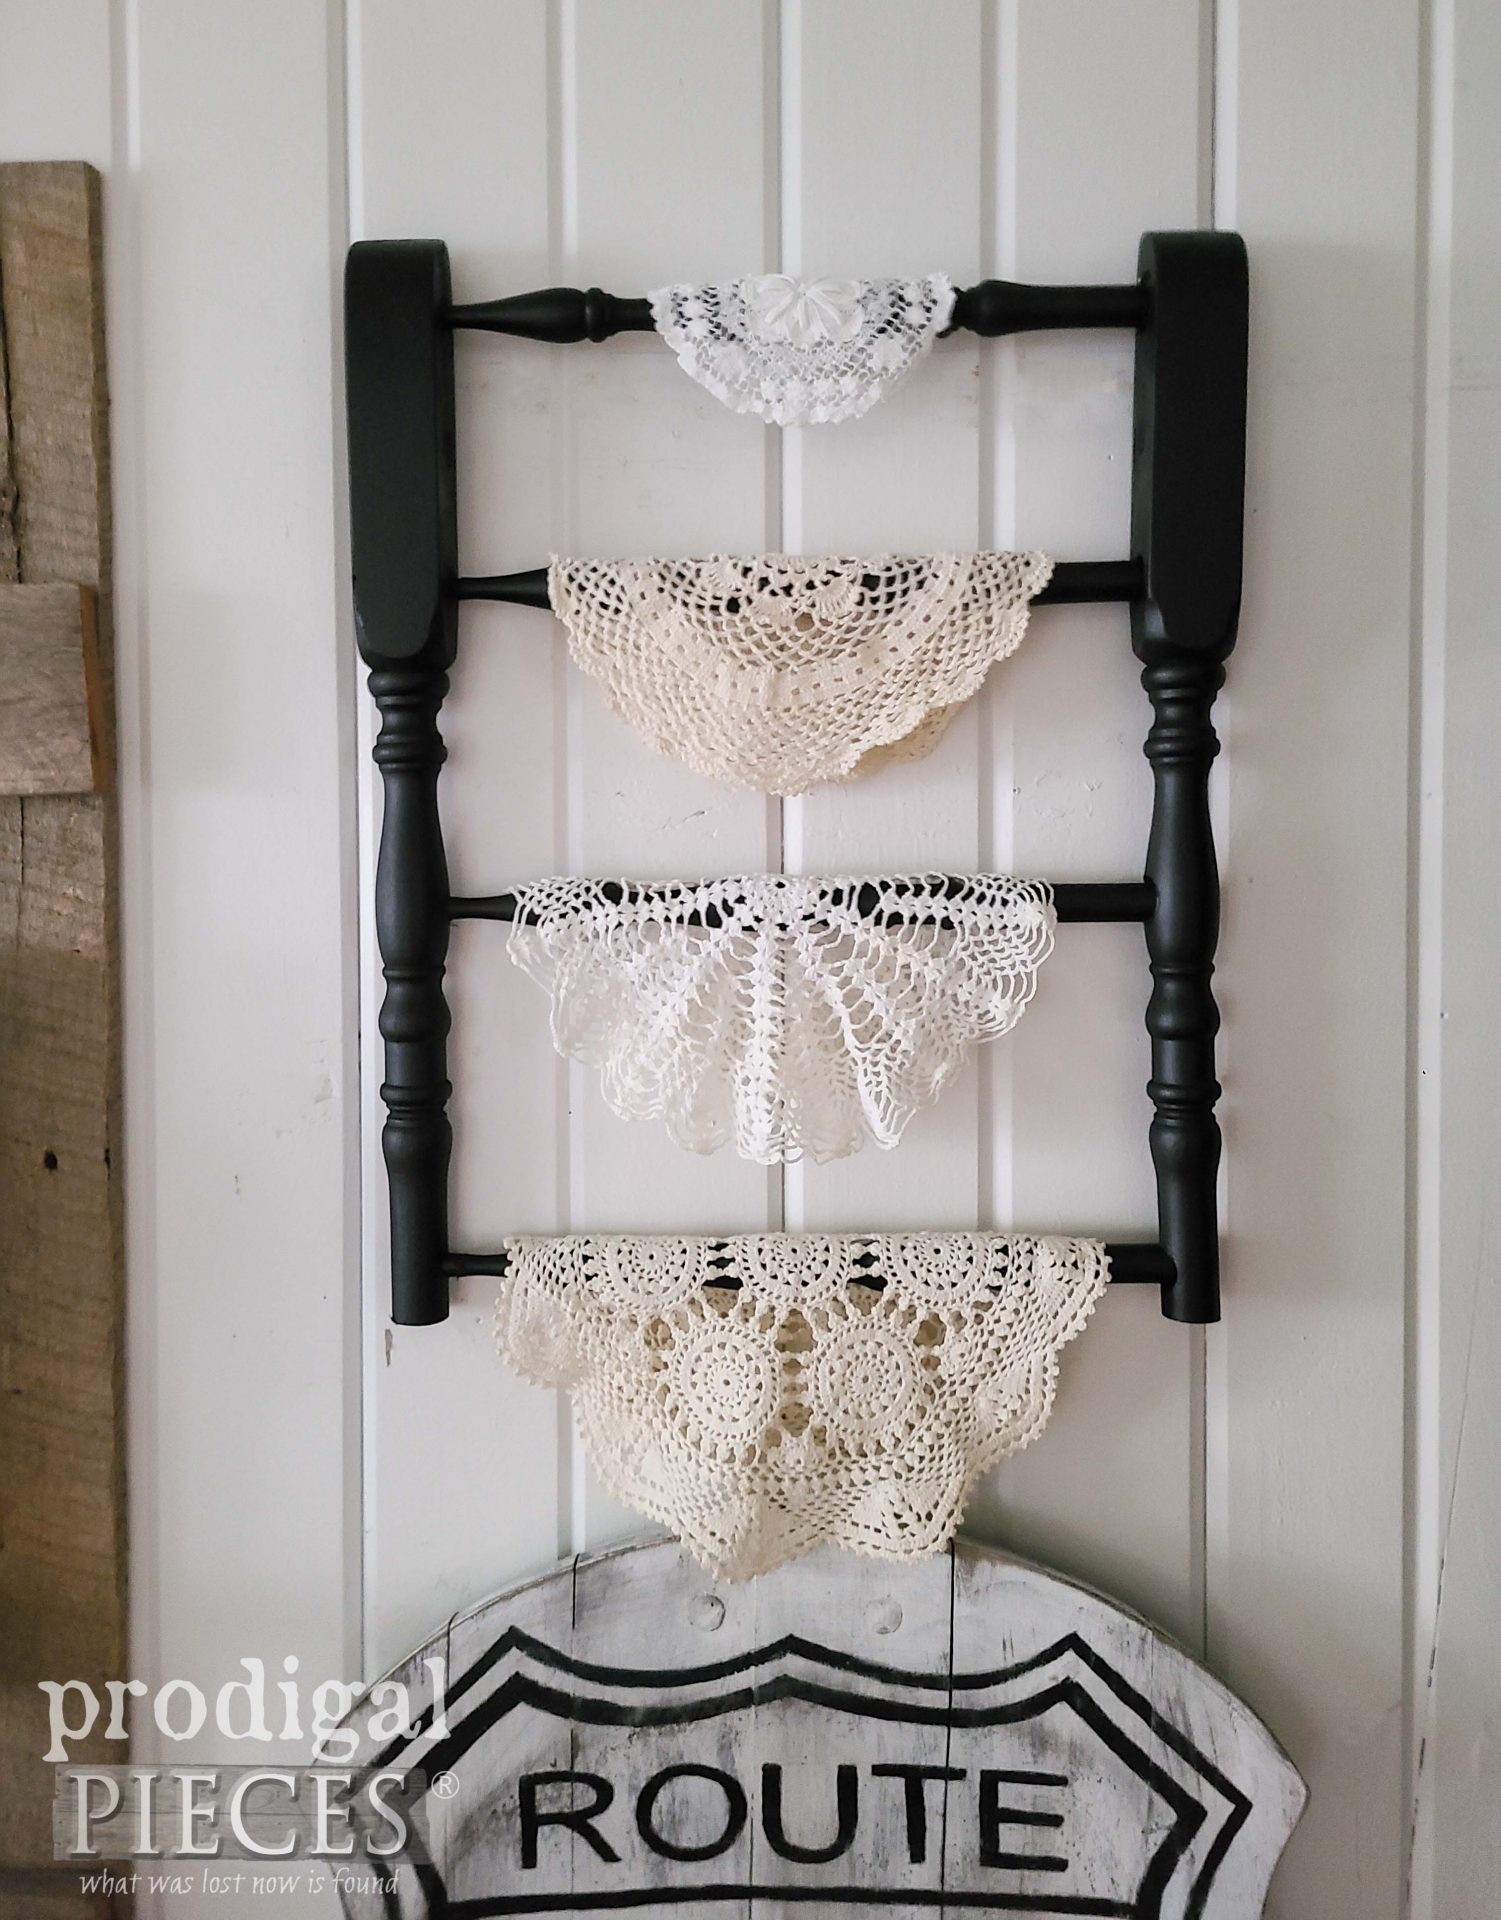 Farmhosue Spindle Rack from an Upcycled Broken Chair with Handmade Doilies by Larissa of Prodigal Pieces | prodigalpieces.com #prodigalpieces #farmhouse #diy #home #farmhouse